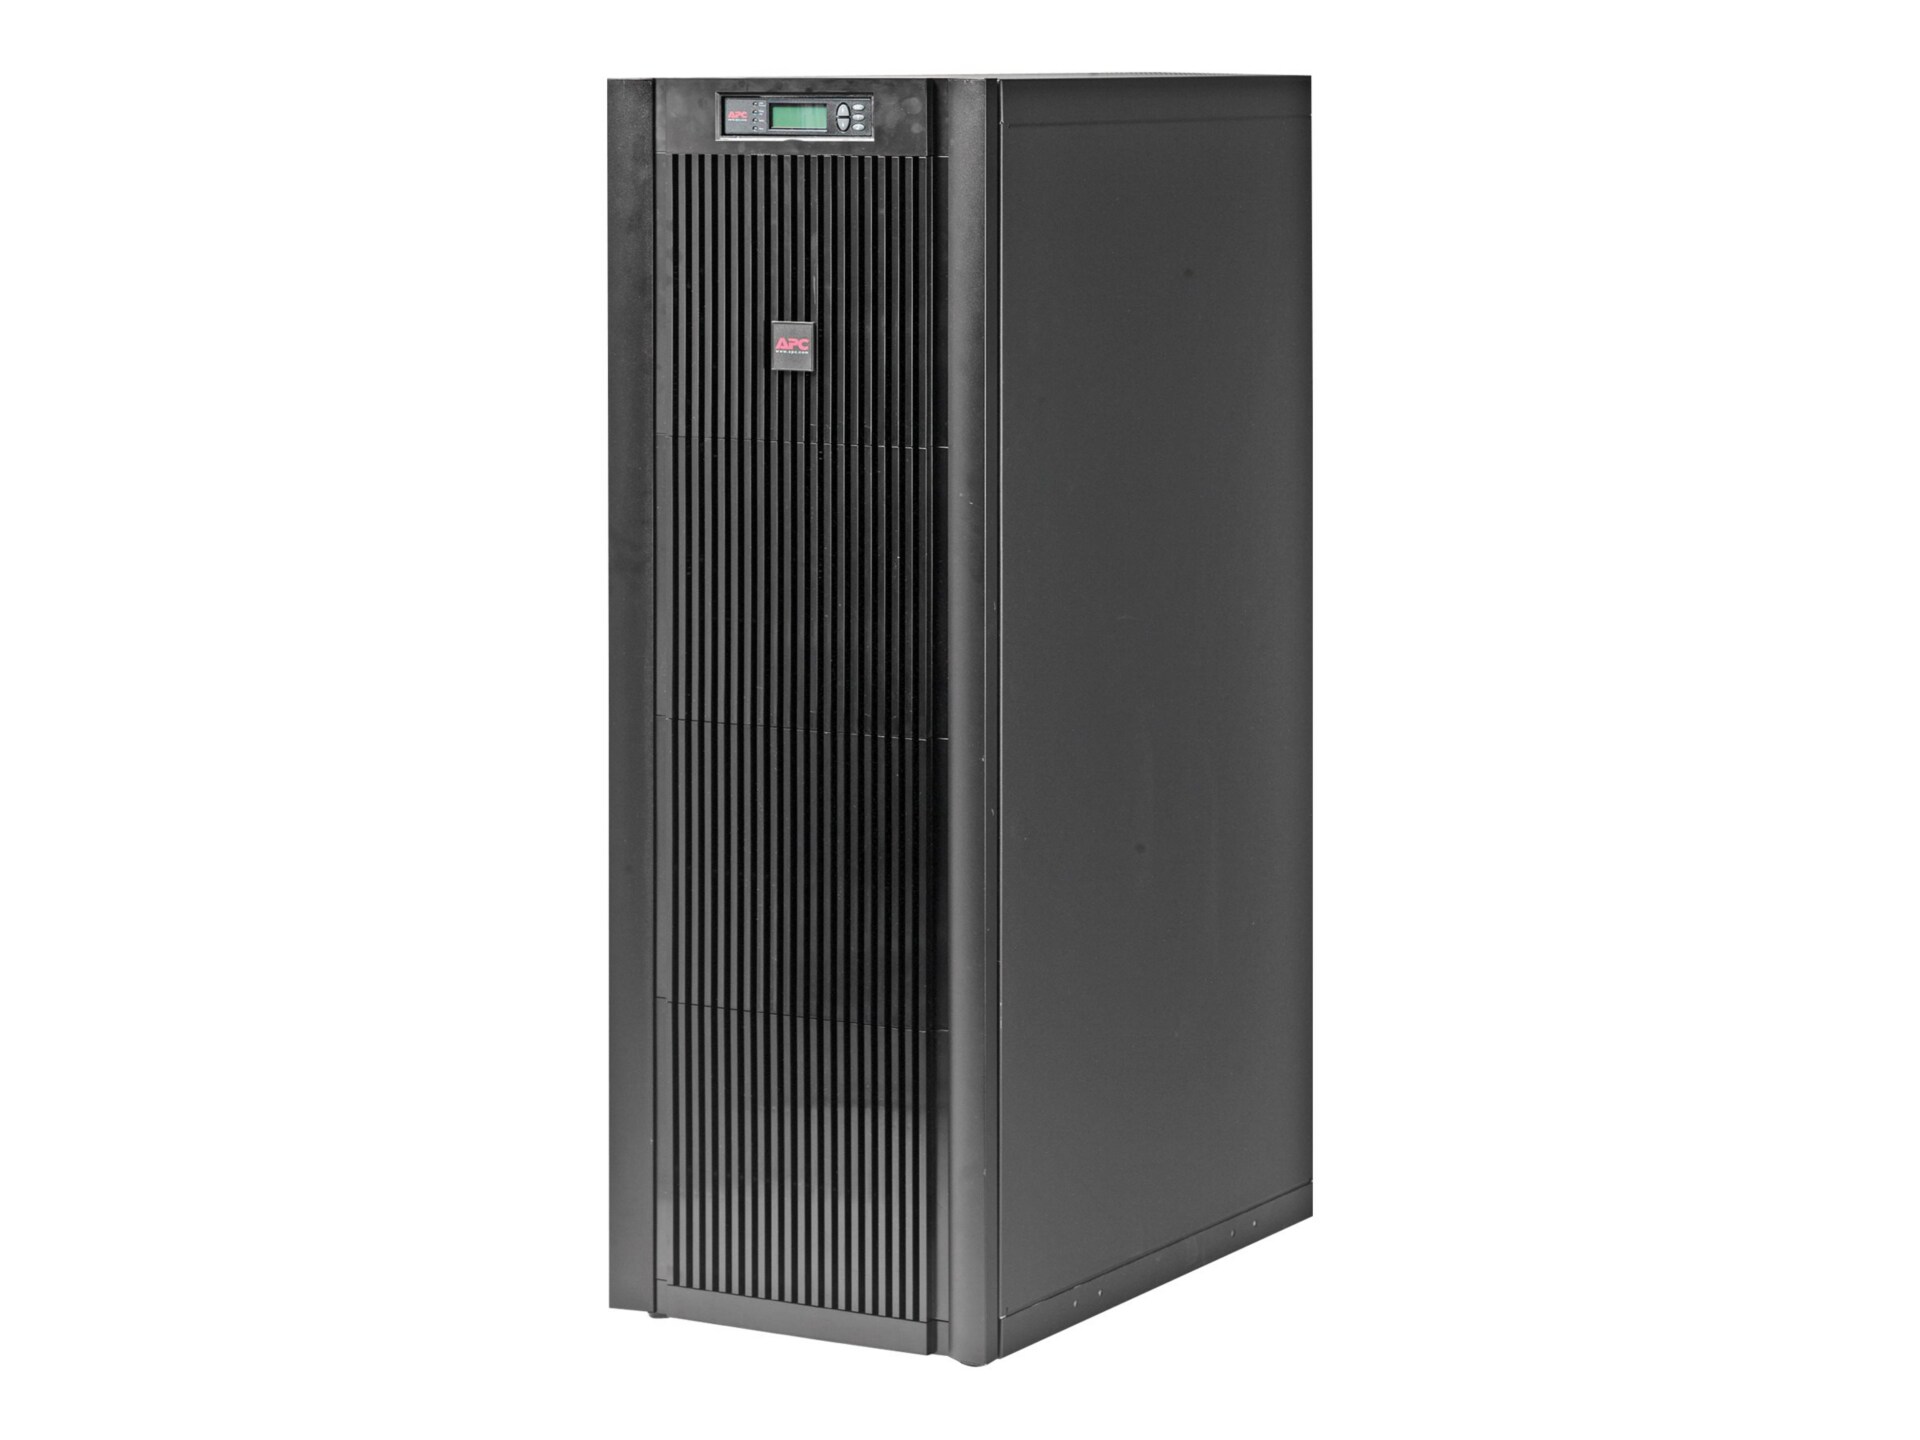 APC Smart-UPS VT 20kVA with 2 Battery Modules Expandable to 4